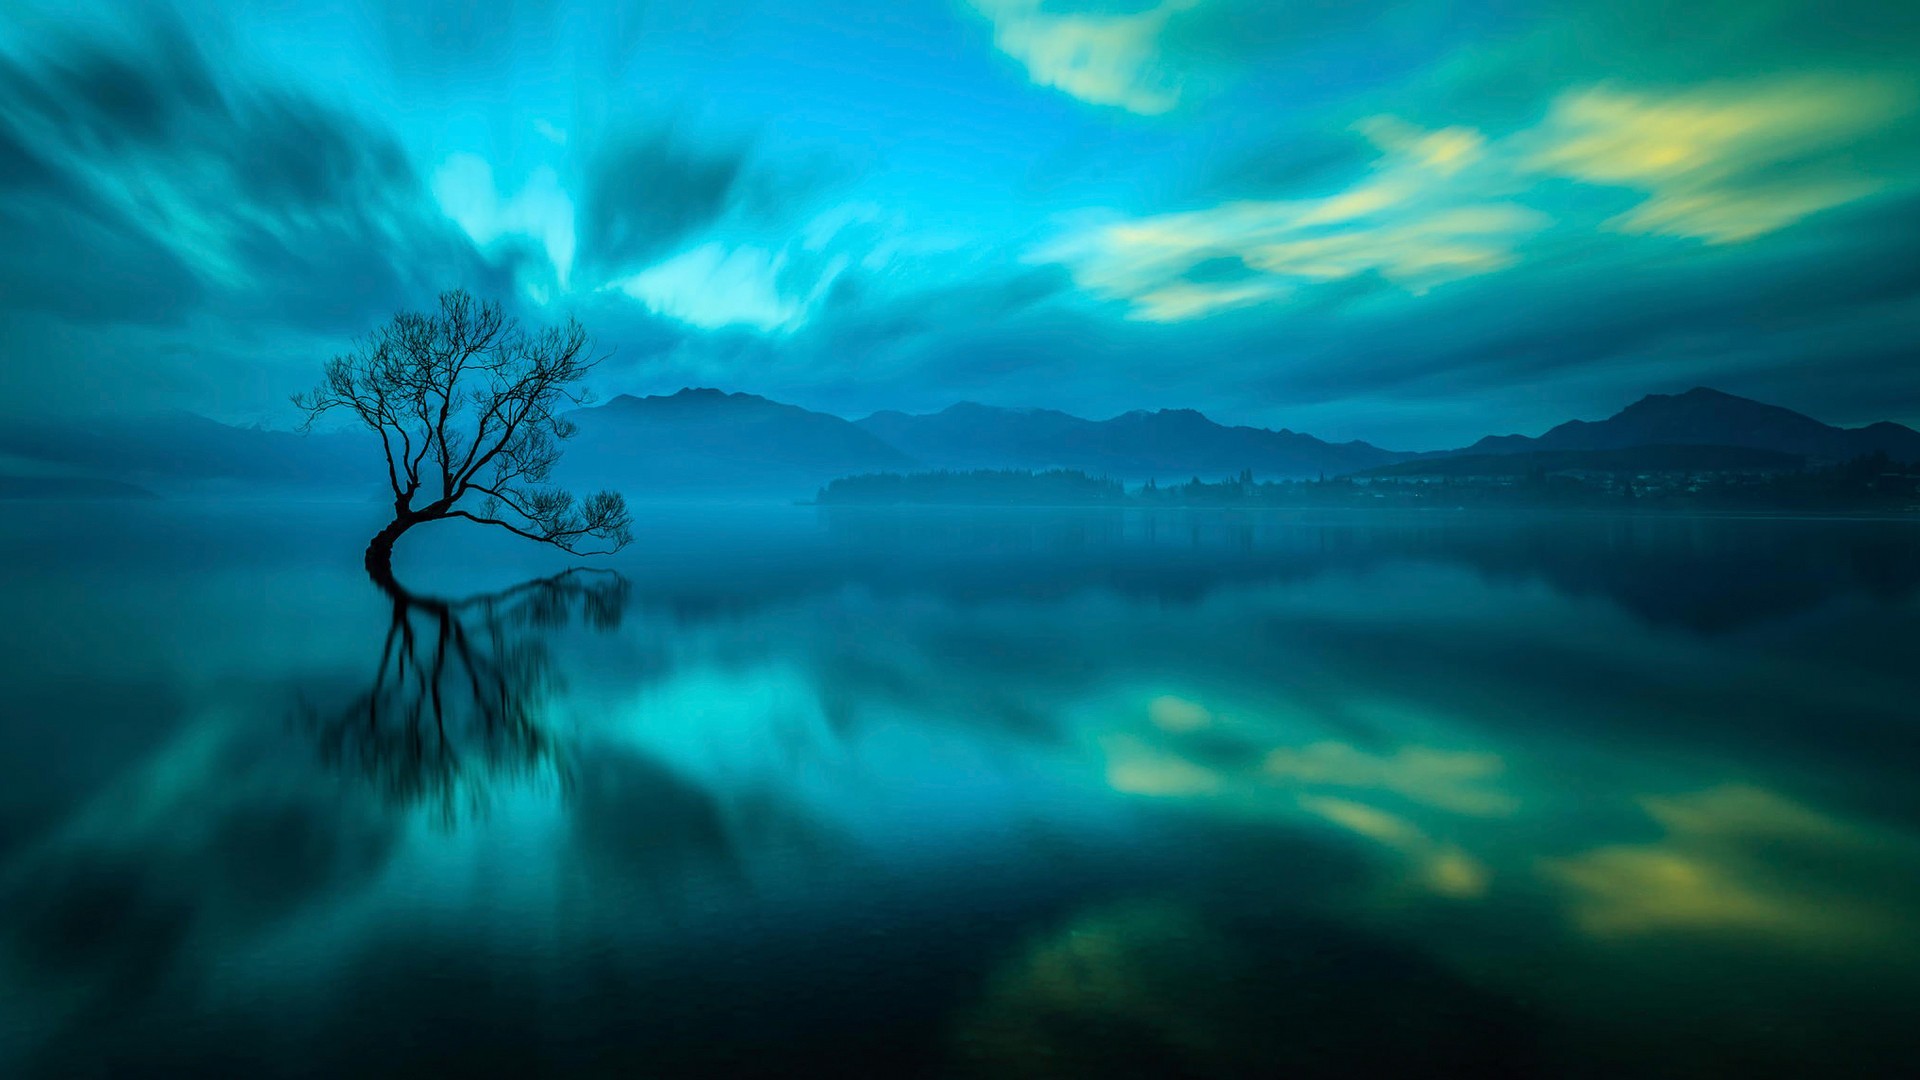 General 1920x1080 nature photography long exposure trees reflection water sky New Zealand cyan turquoise blue night